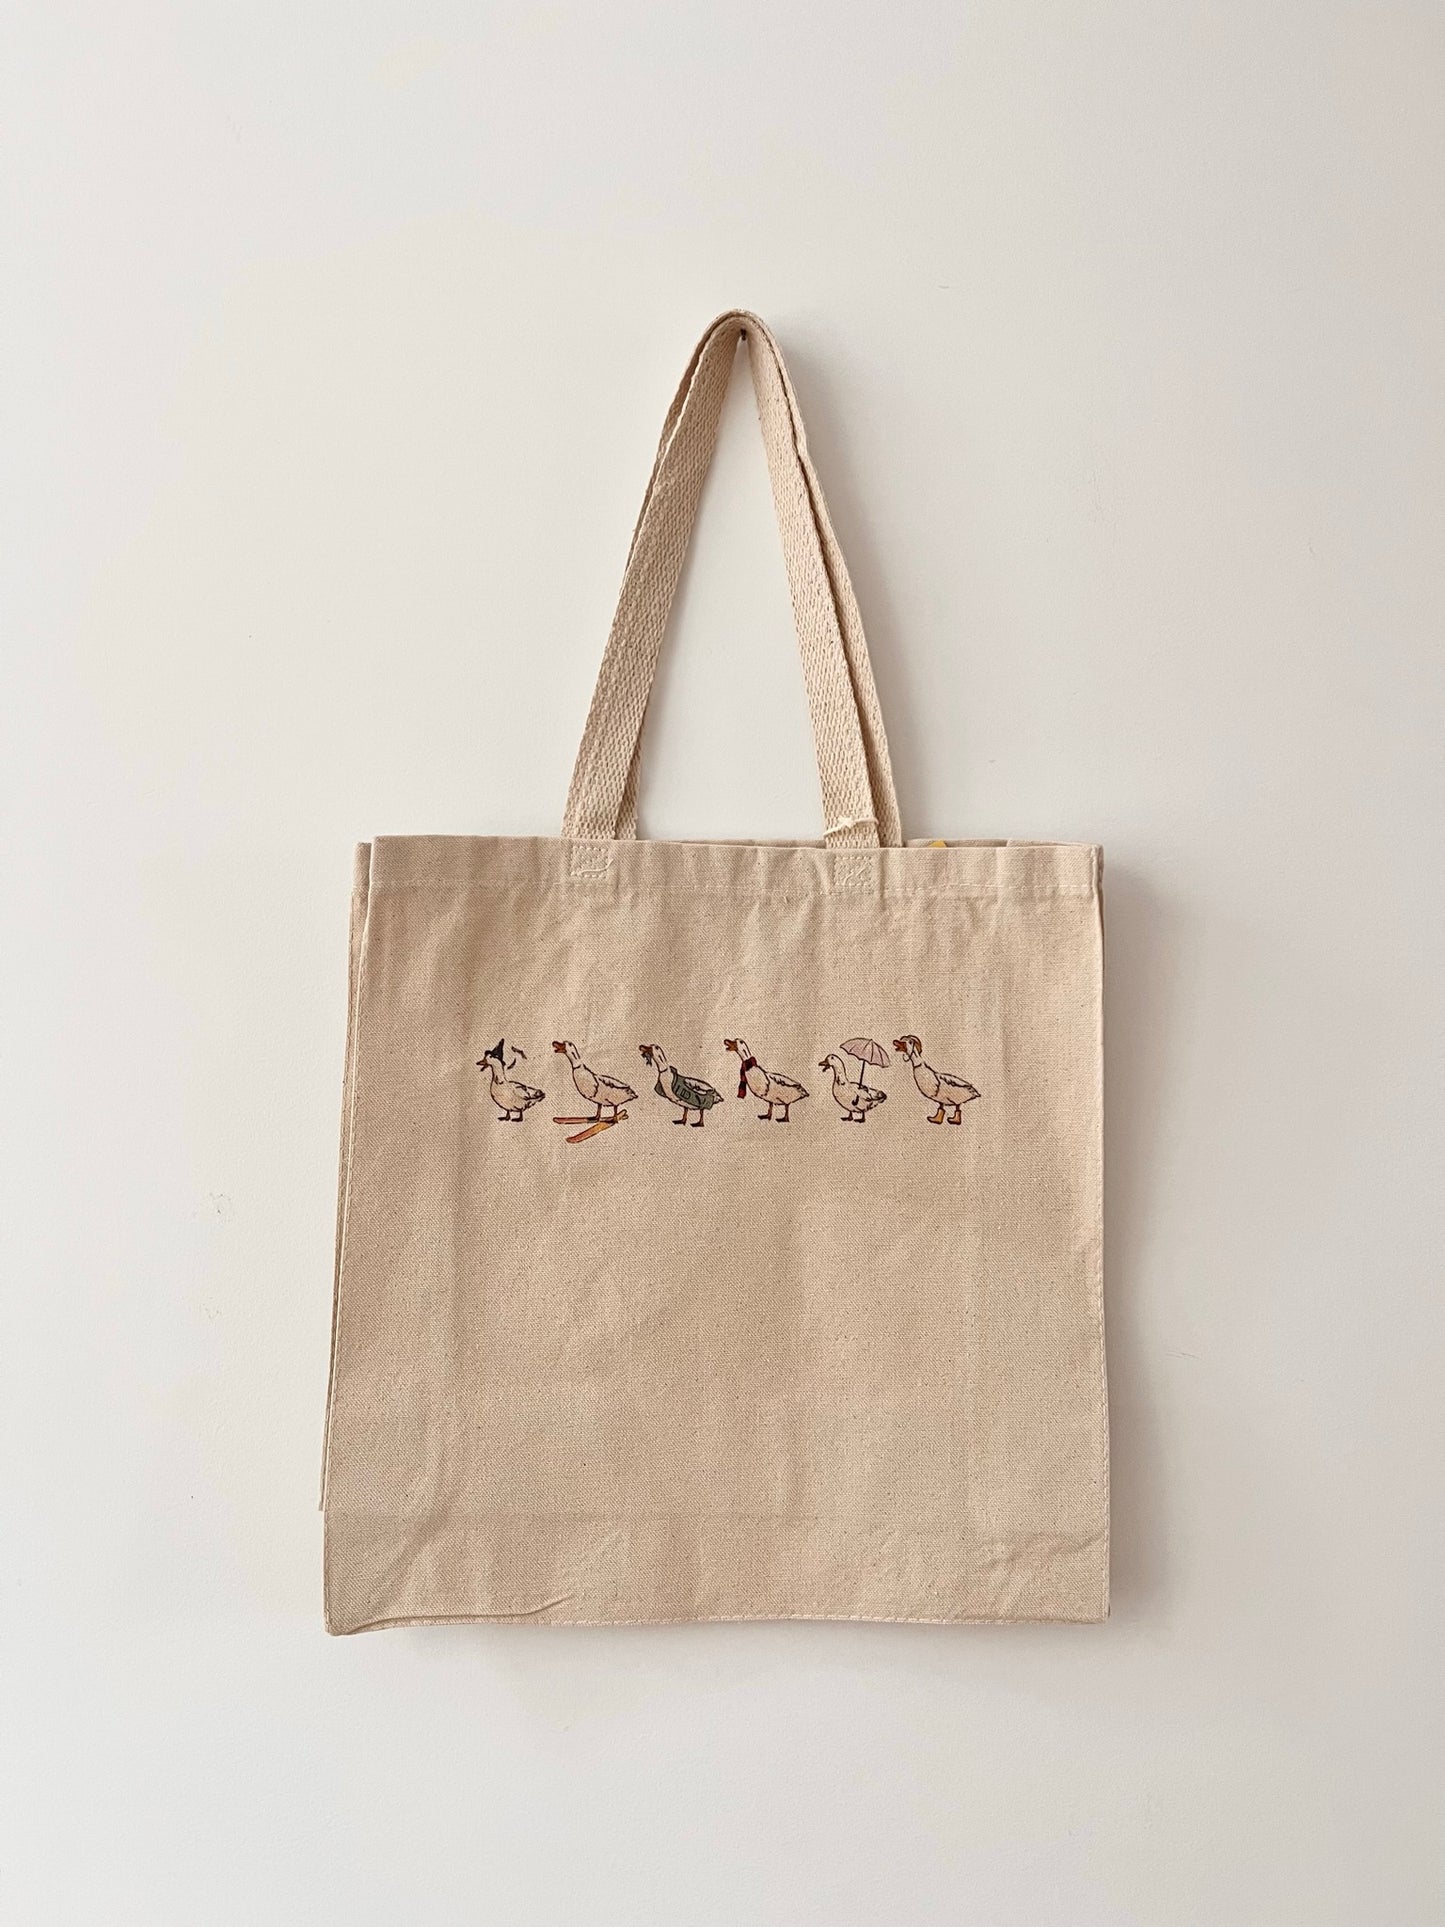 Meaghan Lovis screen printed totes